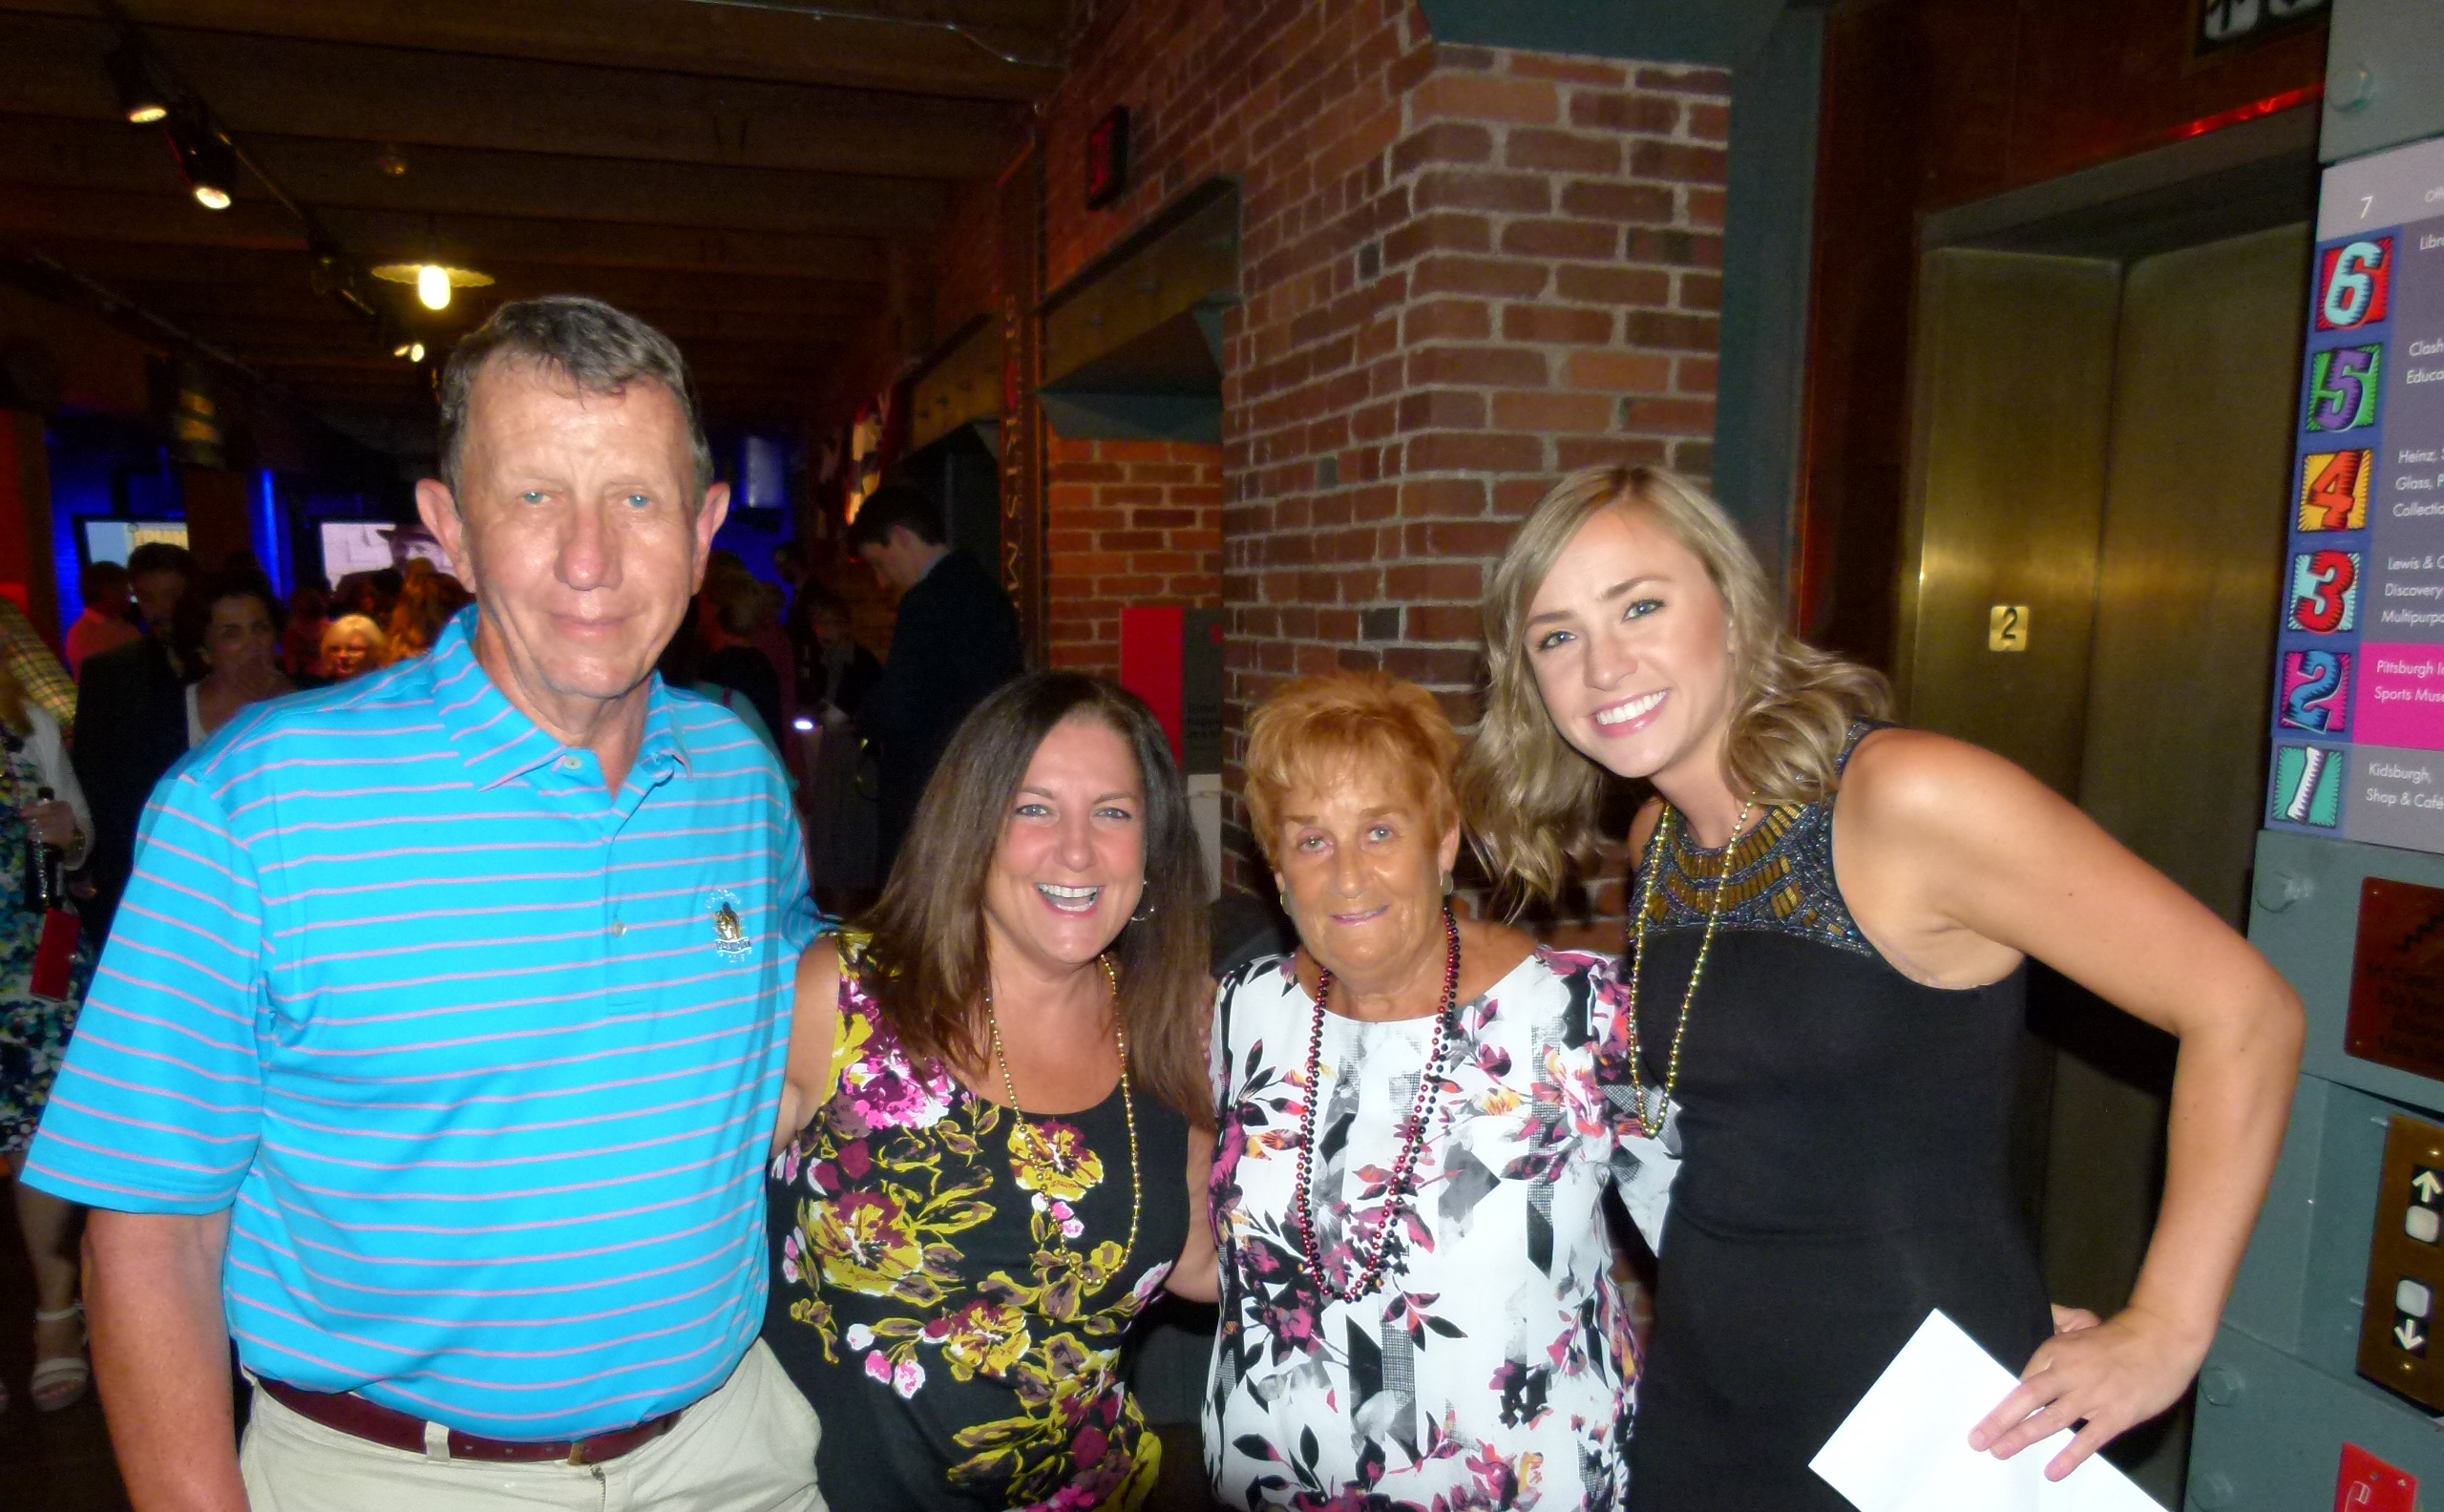 Judy O'Connor (center right), wife of the late Pittsburgh Mayor Bob O'Connor, flanked on the left by daughter Heidy O'Connor Garth, and Bob Jablonowski; and on the right by daughter in law Katie O'Connor (Councilman Corey O'Connor's wife).